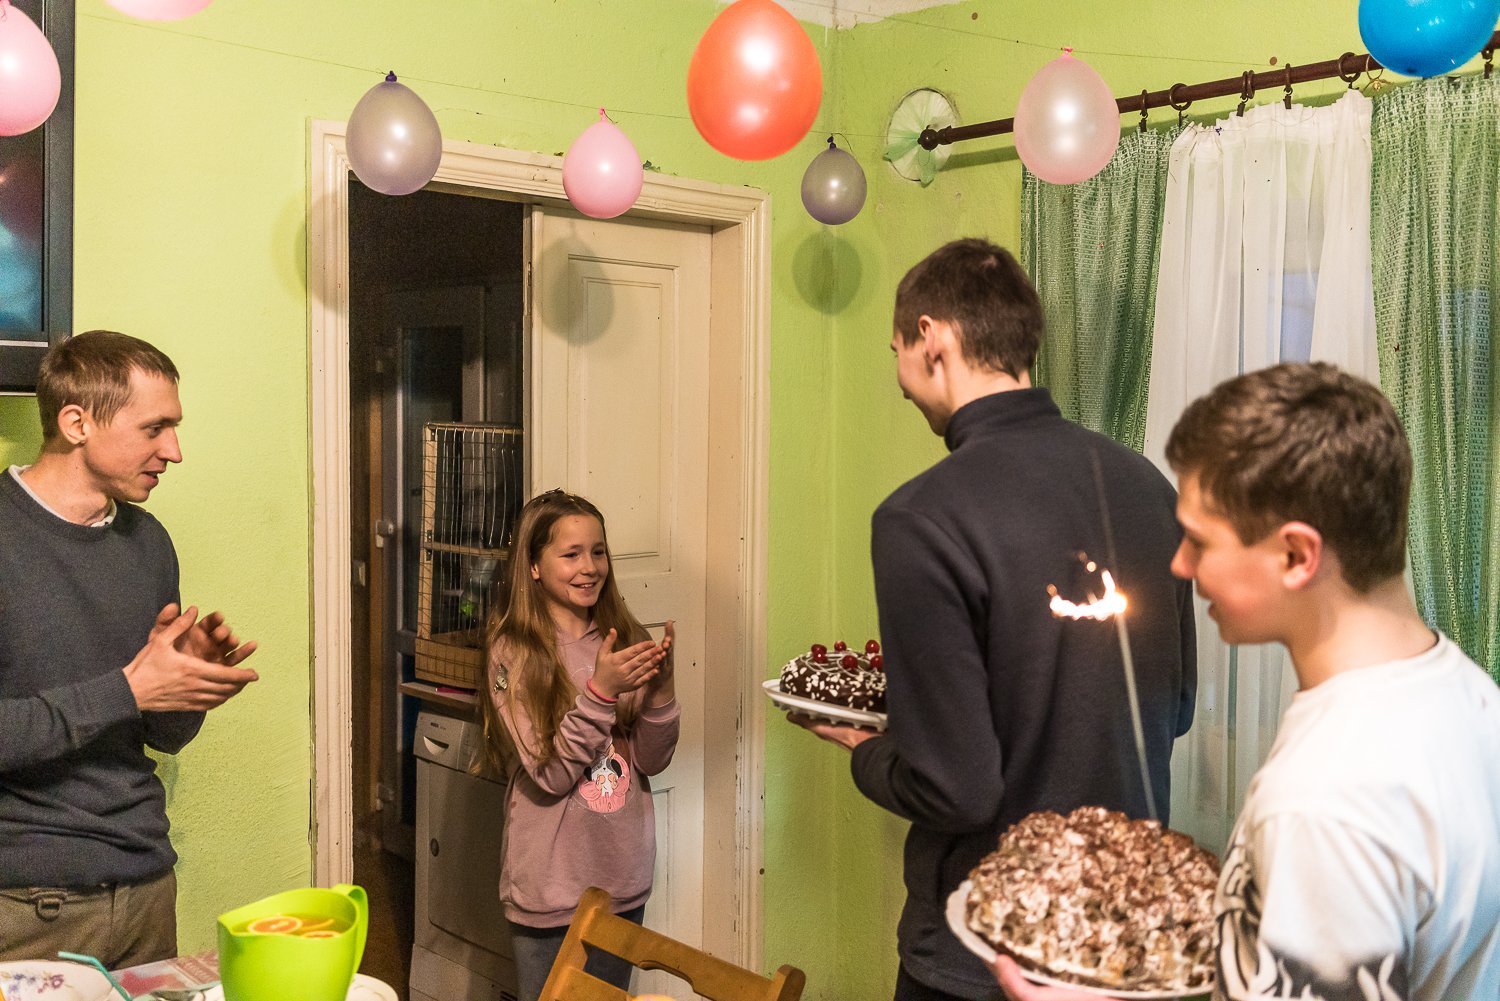  Lena Rusnak, center, celebrates her 11th birthday at the home for disadvantaged children where she lives, which is operated by the charity Christian Rescue Service, on Friday, January 28, 2022 in Pionerske, Ukraine. 